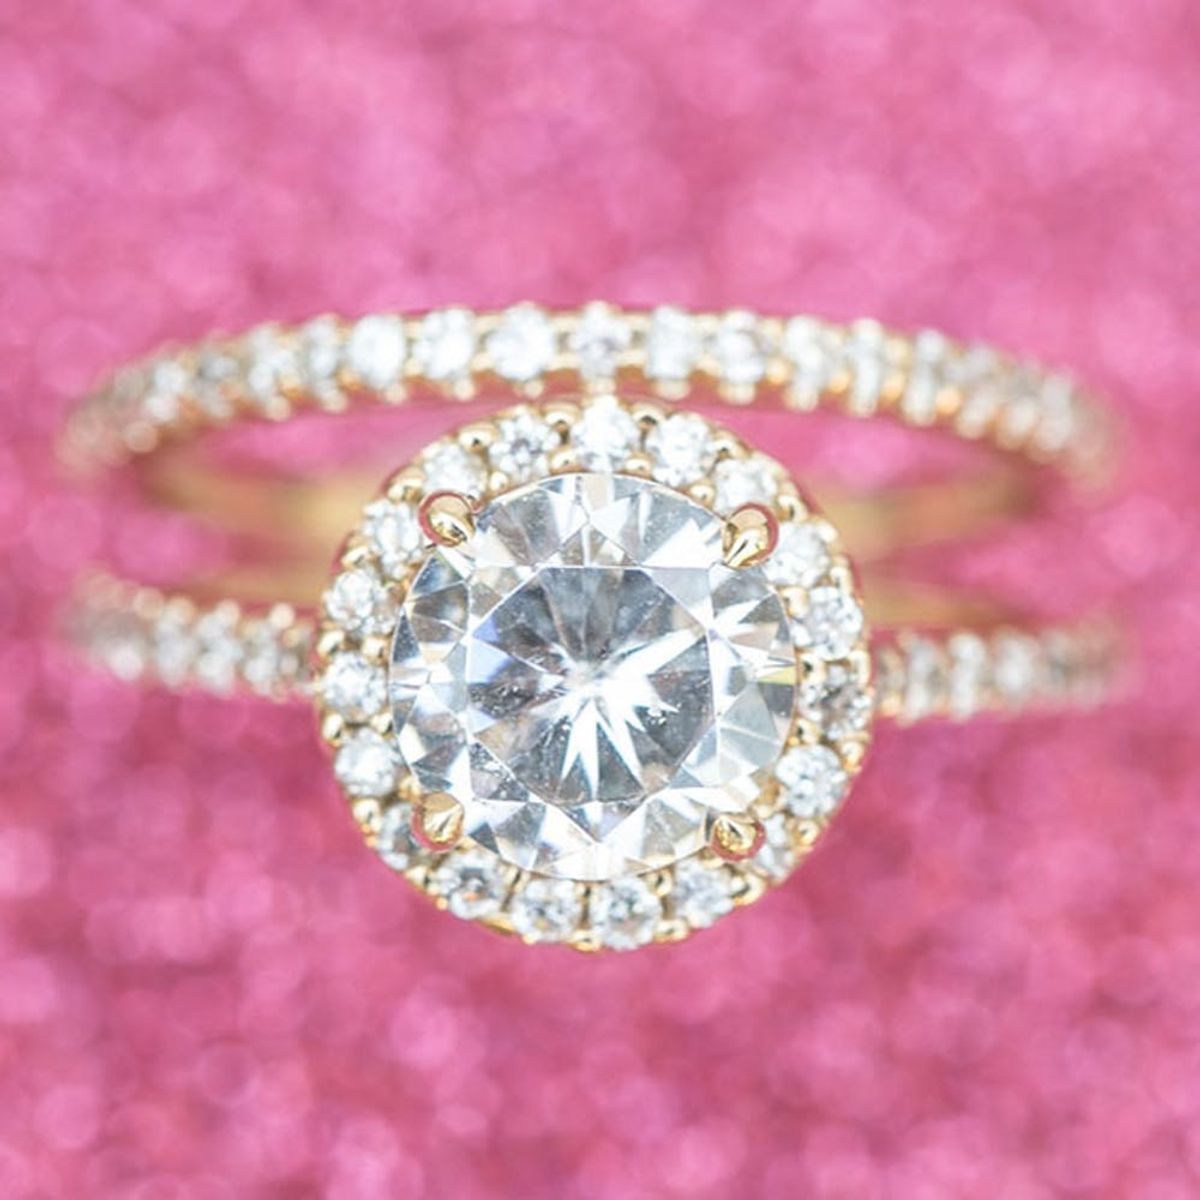 These Are the Most Pinned Engagement Rings of the Last Year